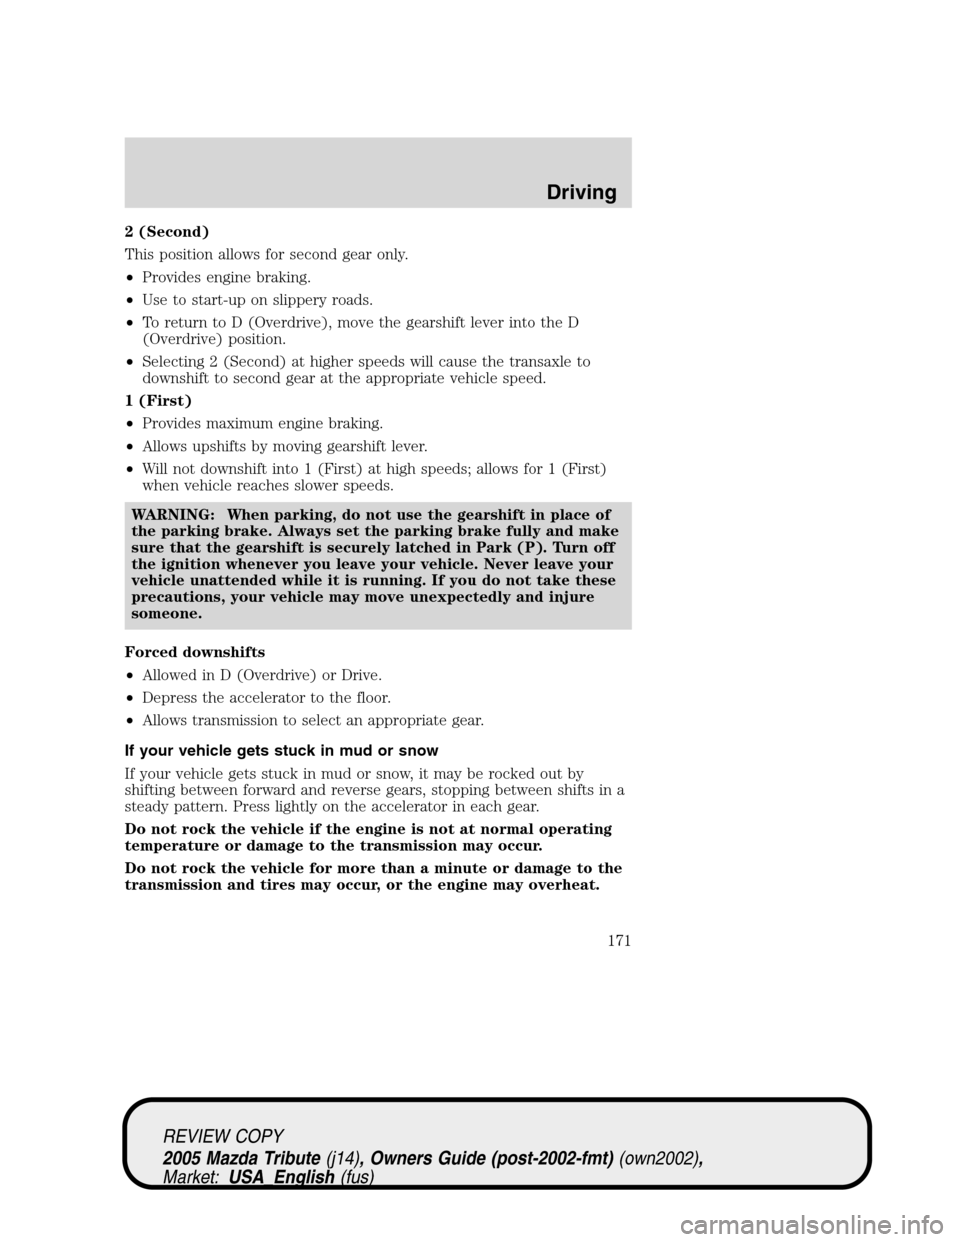 MAZDA MODEL TRIBUTE 2005  Owners Manual (in English) 2 (Second)
This position allows for second gear only.
•Provides engine braking.
•Use to start-up on slippery roads.
•To return to D (Overdrive), move the gearshift lever into the D
(Overdrive) p